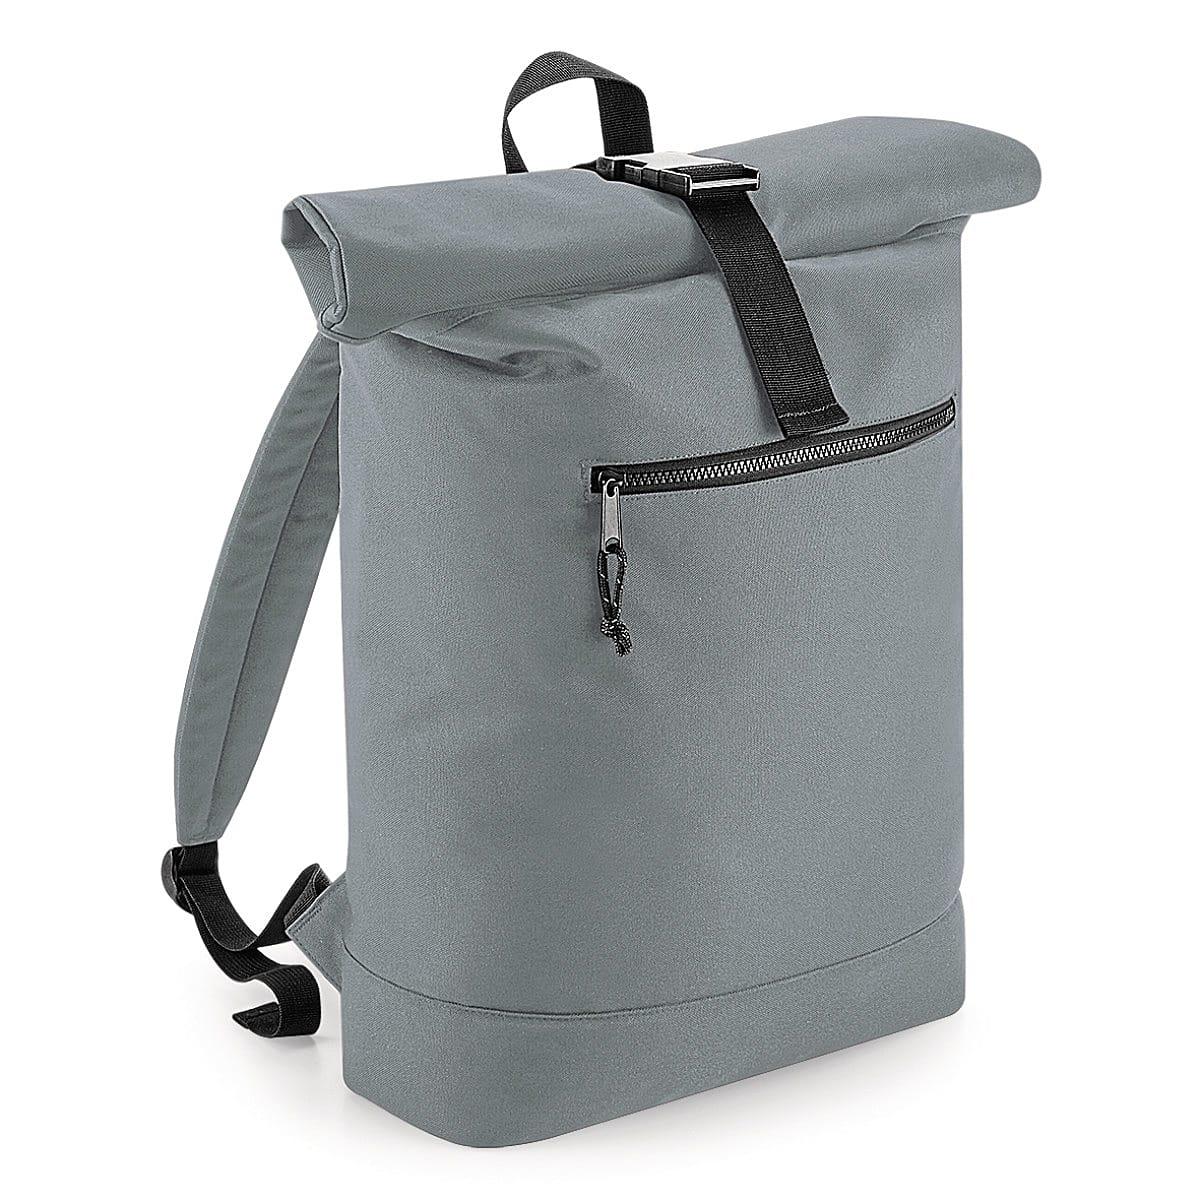 Bagbase Recycled Rolltop Backpack in Pure Grey (Product Code: BG286)